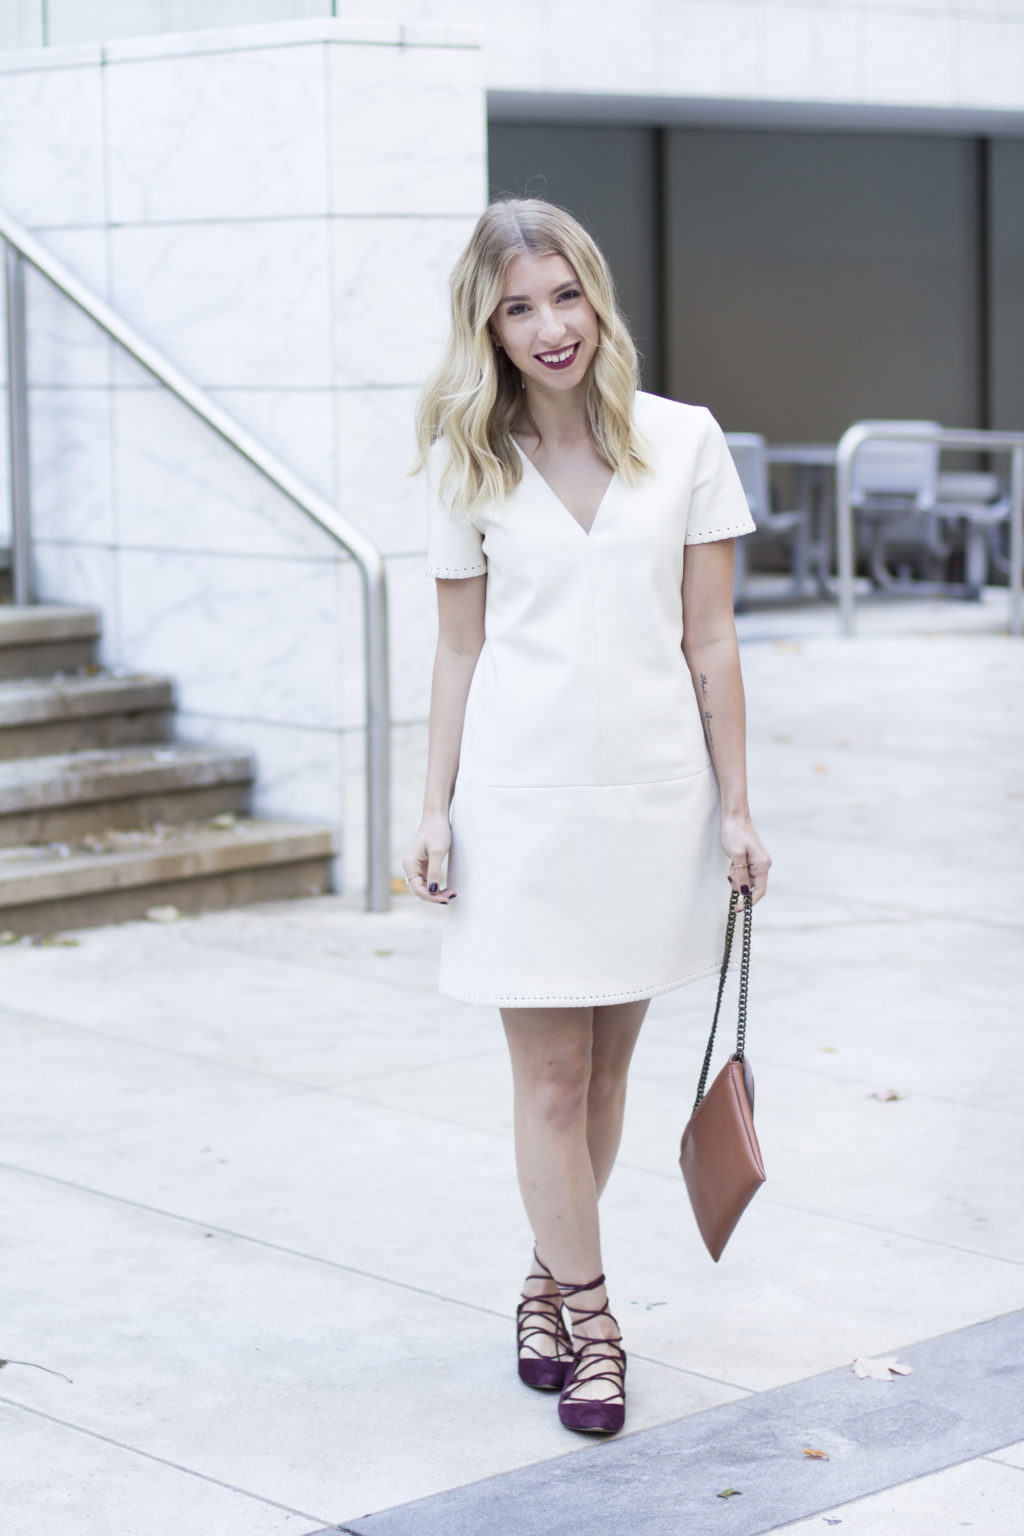 Leather Braided Dress | The Blondielocks | Life + Style